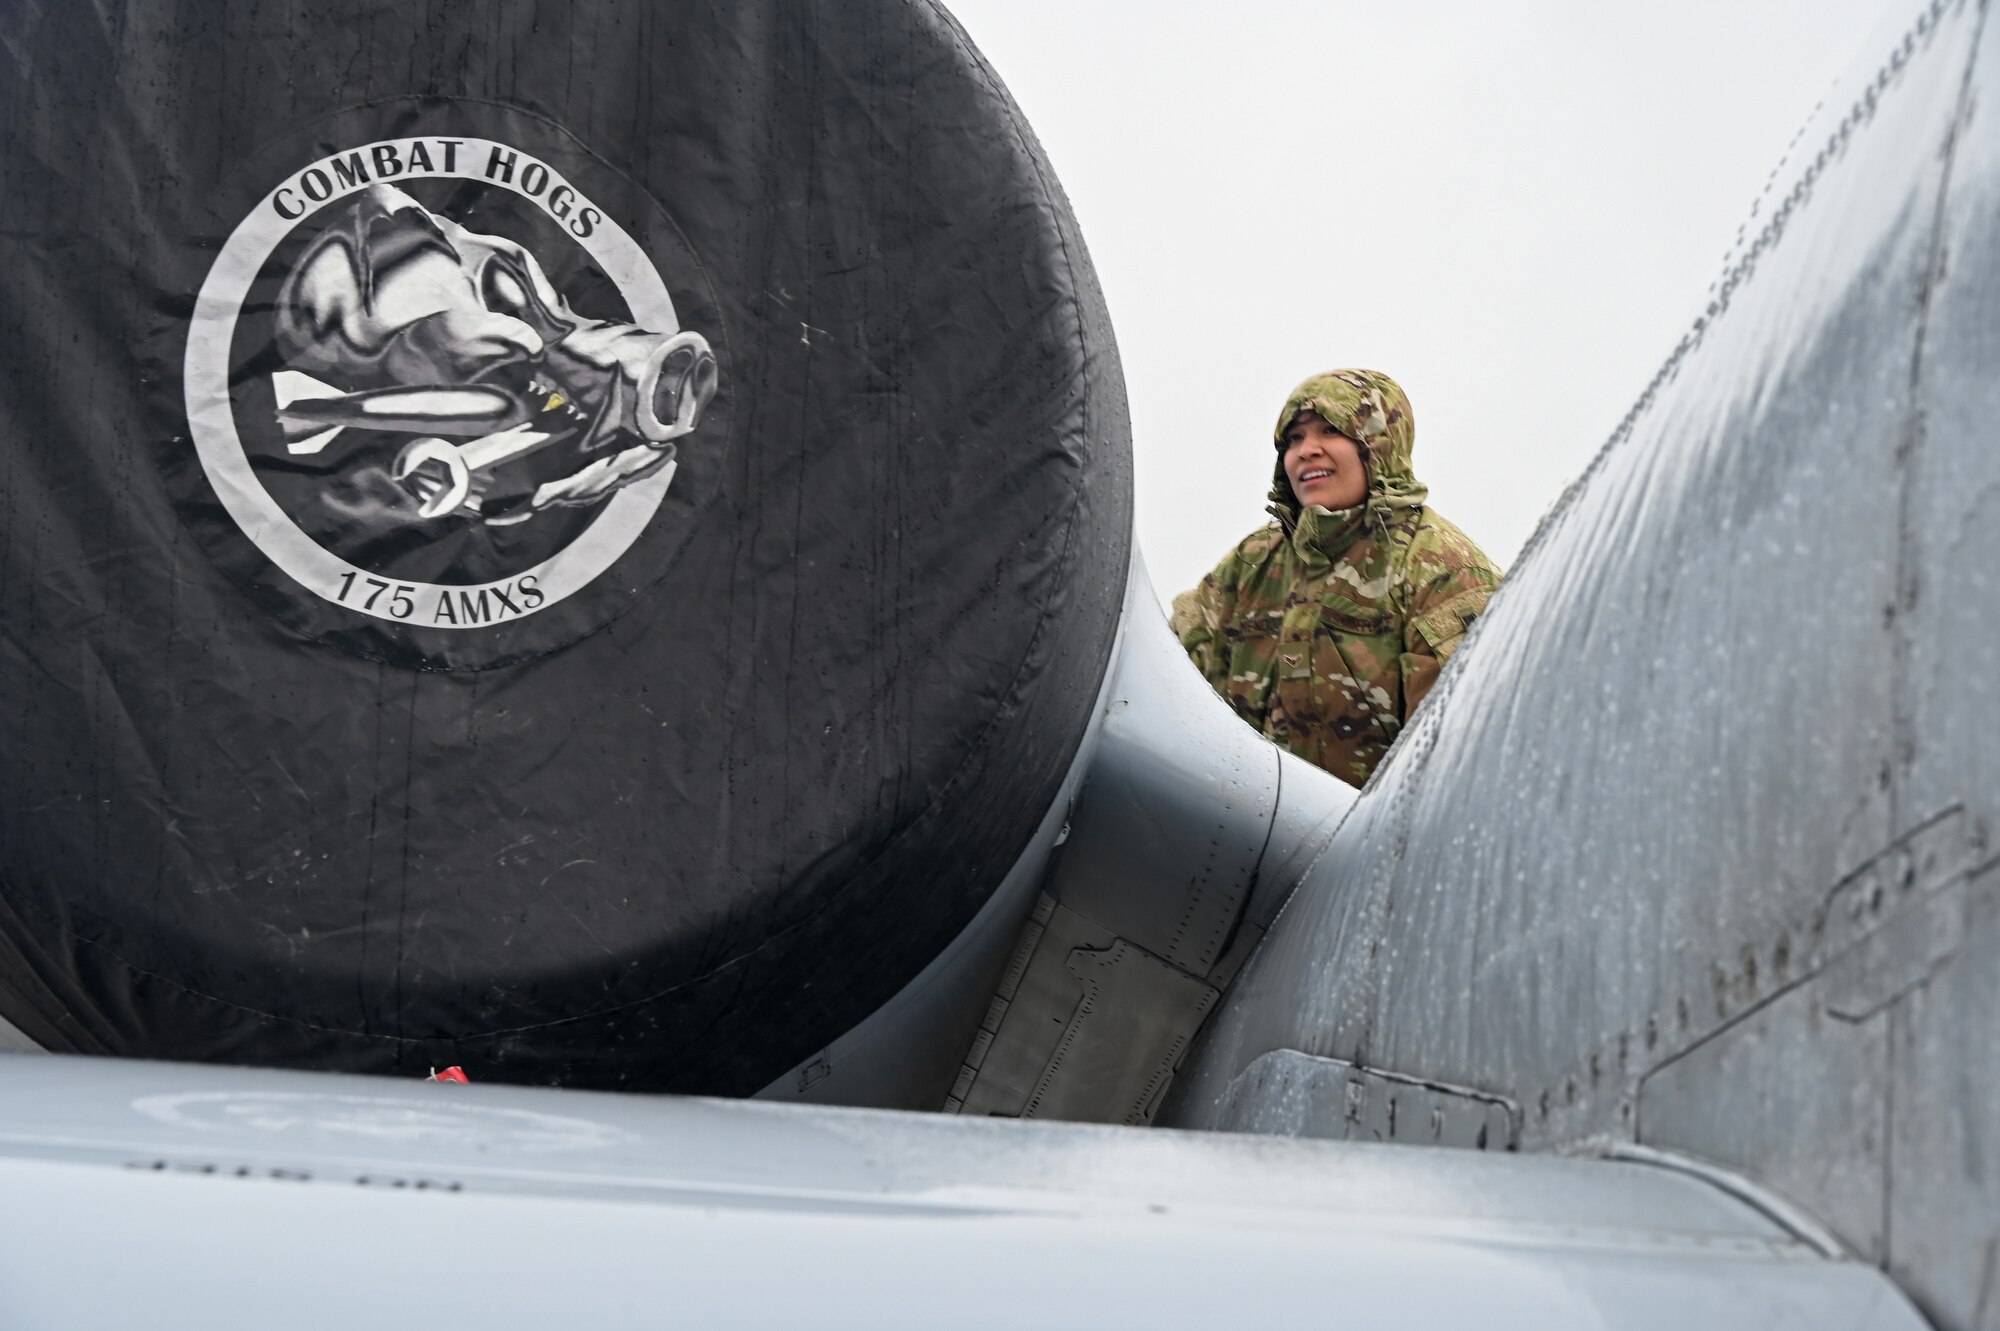 U.S. Air Force Airman 1st Class Lesly Mendoza, a weapons loader assigned to the 175th Aircraft Maintenance Squadron, Maryland Air National Guard, inspects an A-10C Thunderbolt II aircraft after arrival at Lielvārde Air Base, located in the Vidzeme region of Latvia, May 14, 2022, for support and training while participating in DEFENDER-Europe 22.